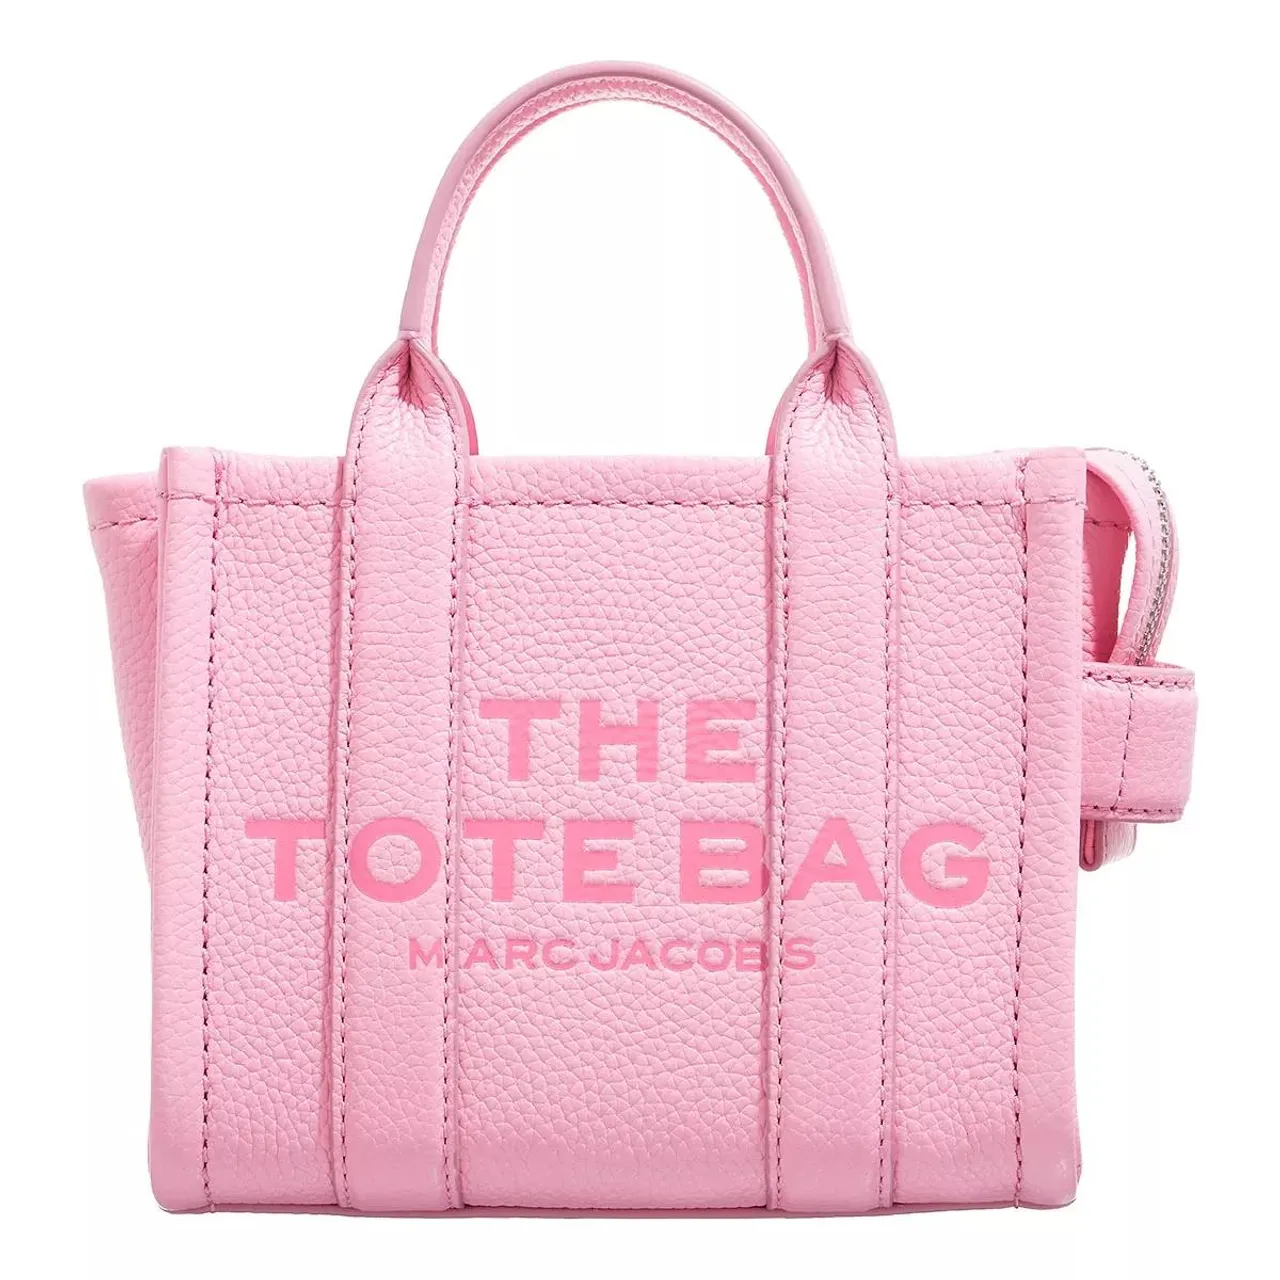 Marc Jacobs Tote Bags - The Tote Bag Leather - pink - Tote Bags for ladies